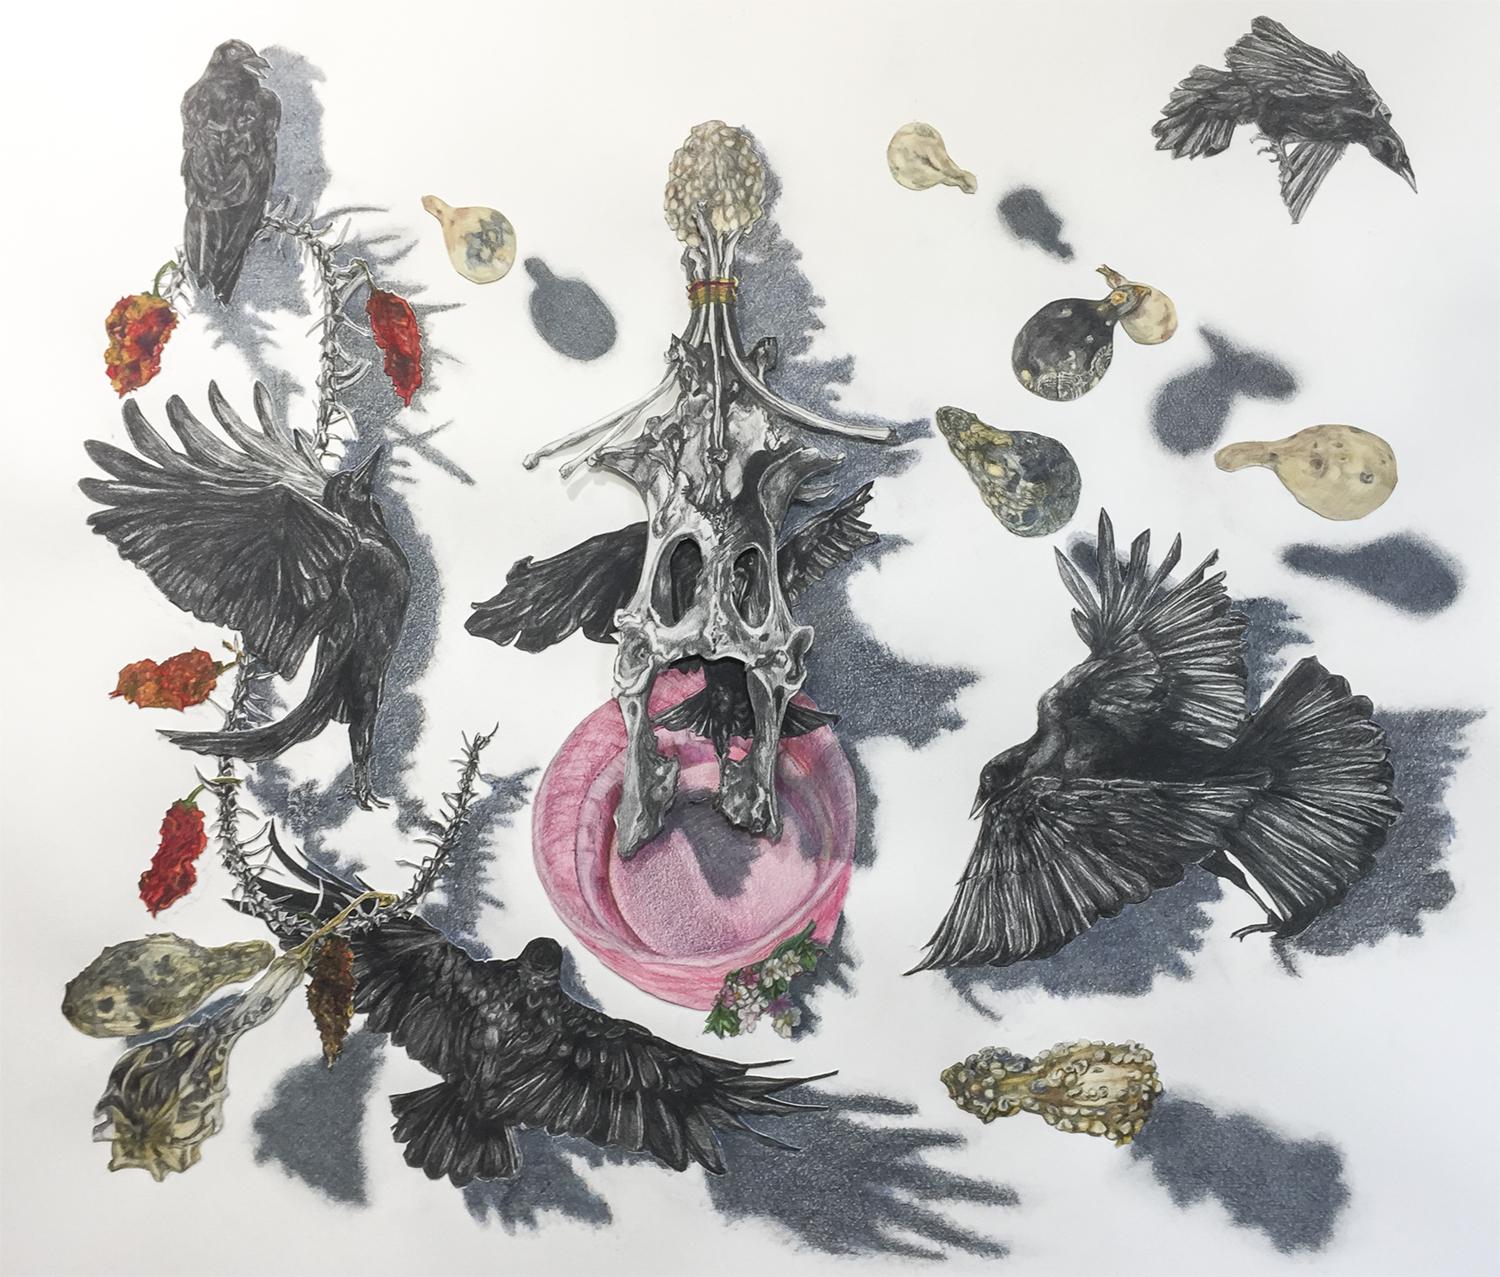 A mixed media work on paper with color pencil, graphite and collage. Depicts the Queen(pink pillbox hat) now at the foot of the King(assembly of bones). Surrounding the King and Queen are the crows and other important symbols.